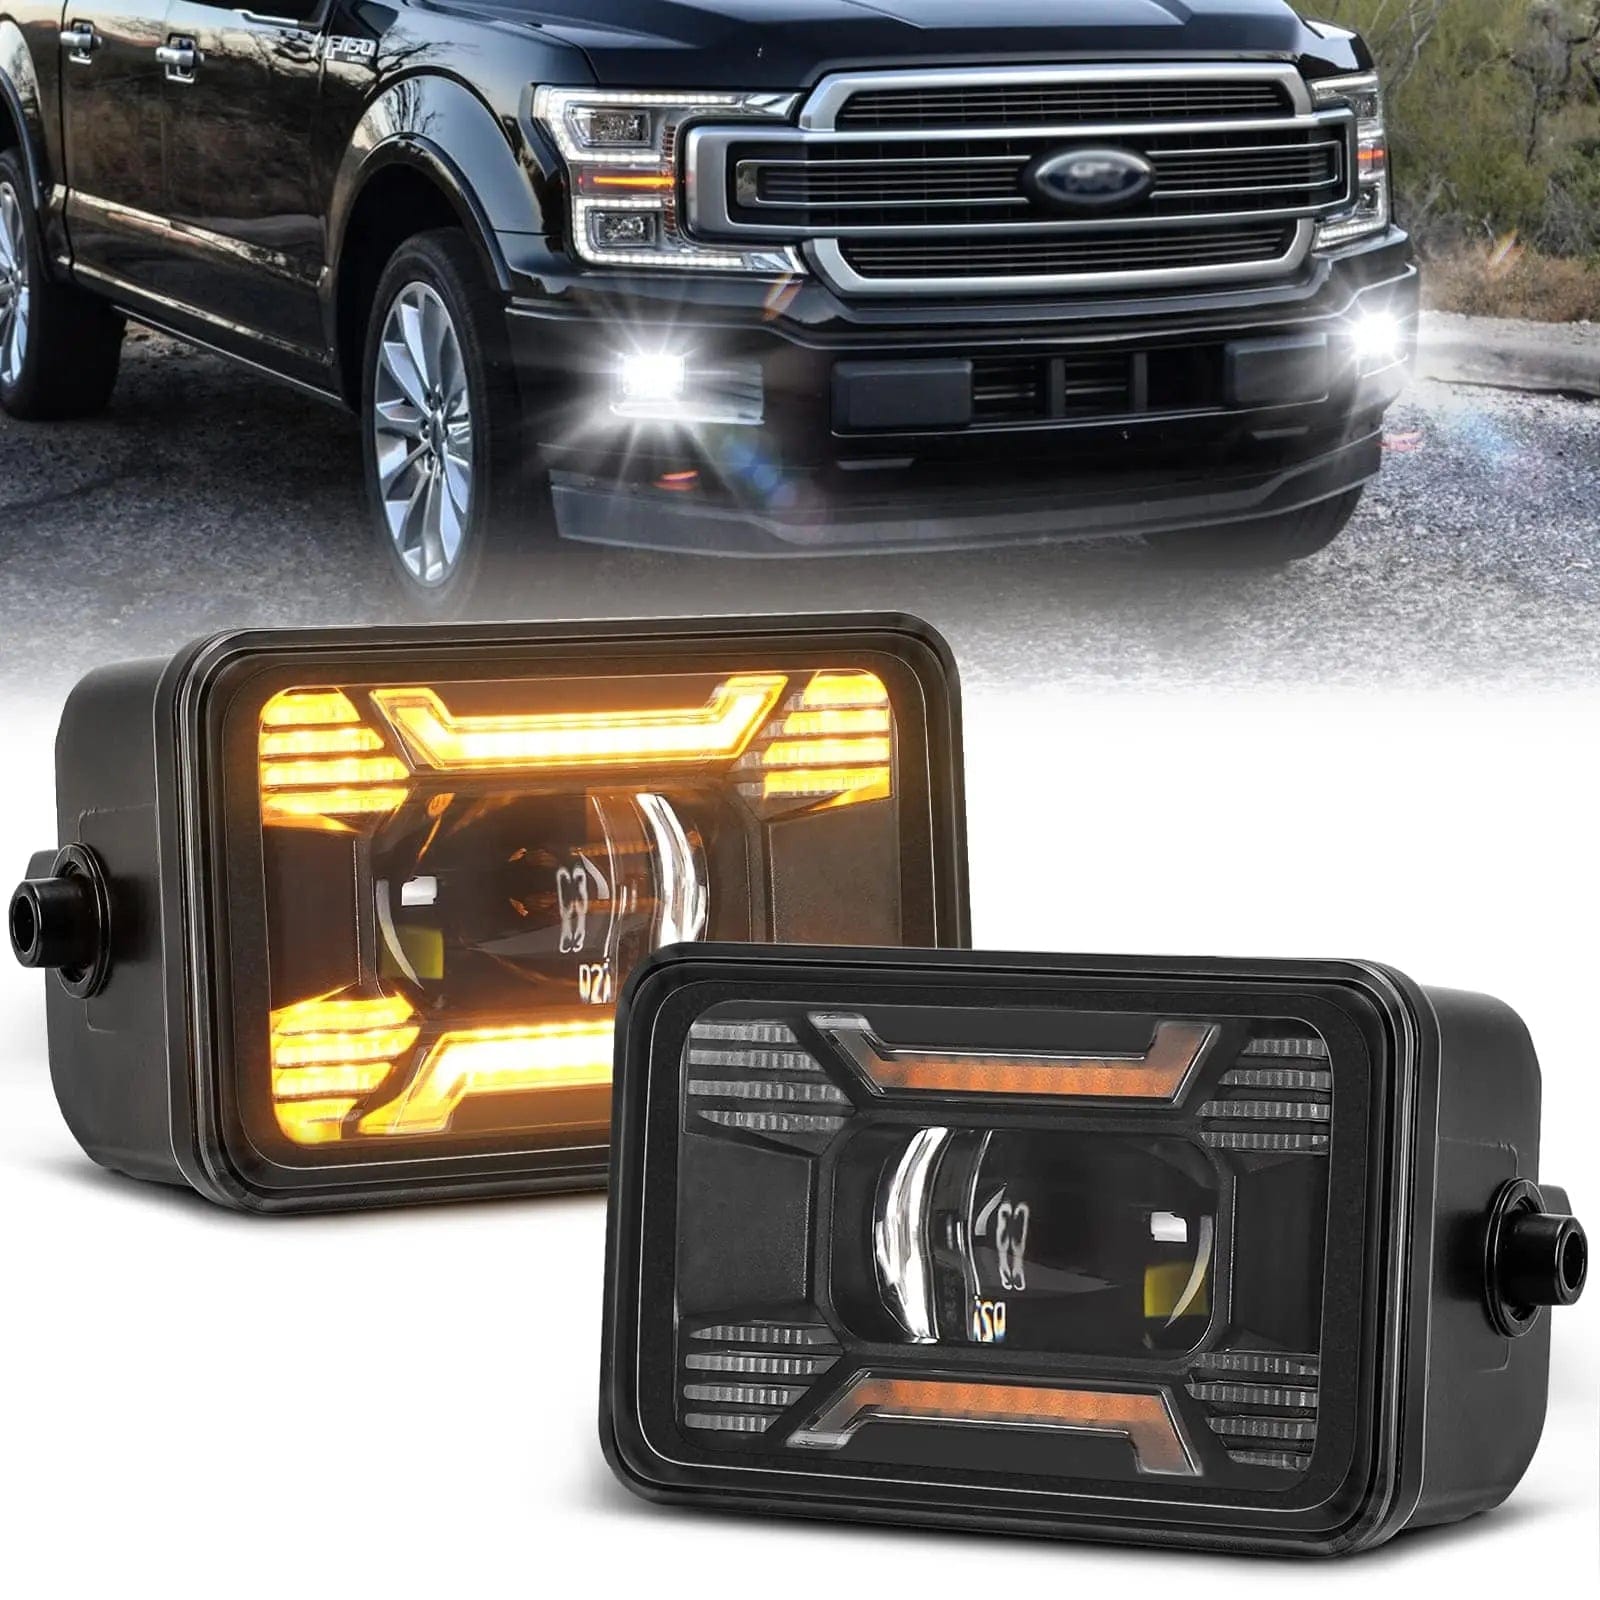 Ford LED Fog Lights Assembly with Turn Signal for F150 Super Duty SUPAREE